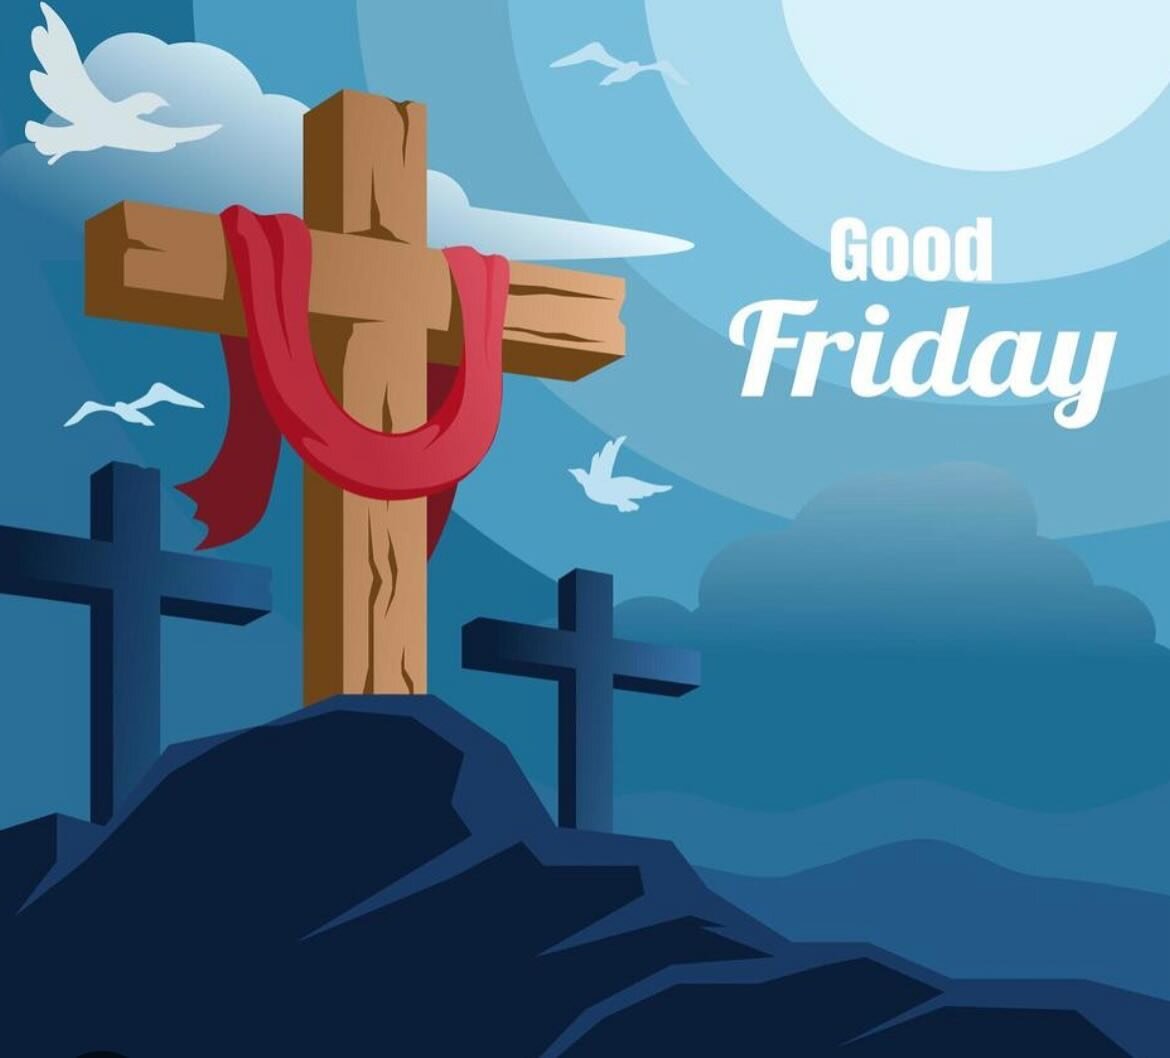 Wellspring of Life Counseling&rsquo;s front office will be closed today for Good Friday and will reopen 4/1 @ 8:30am 

Please have a seat in the waiting room if you have an appointment with one of our therapists, as some are still seeing clients toda